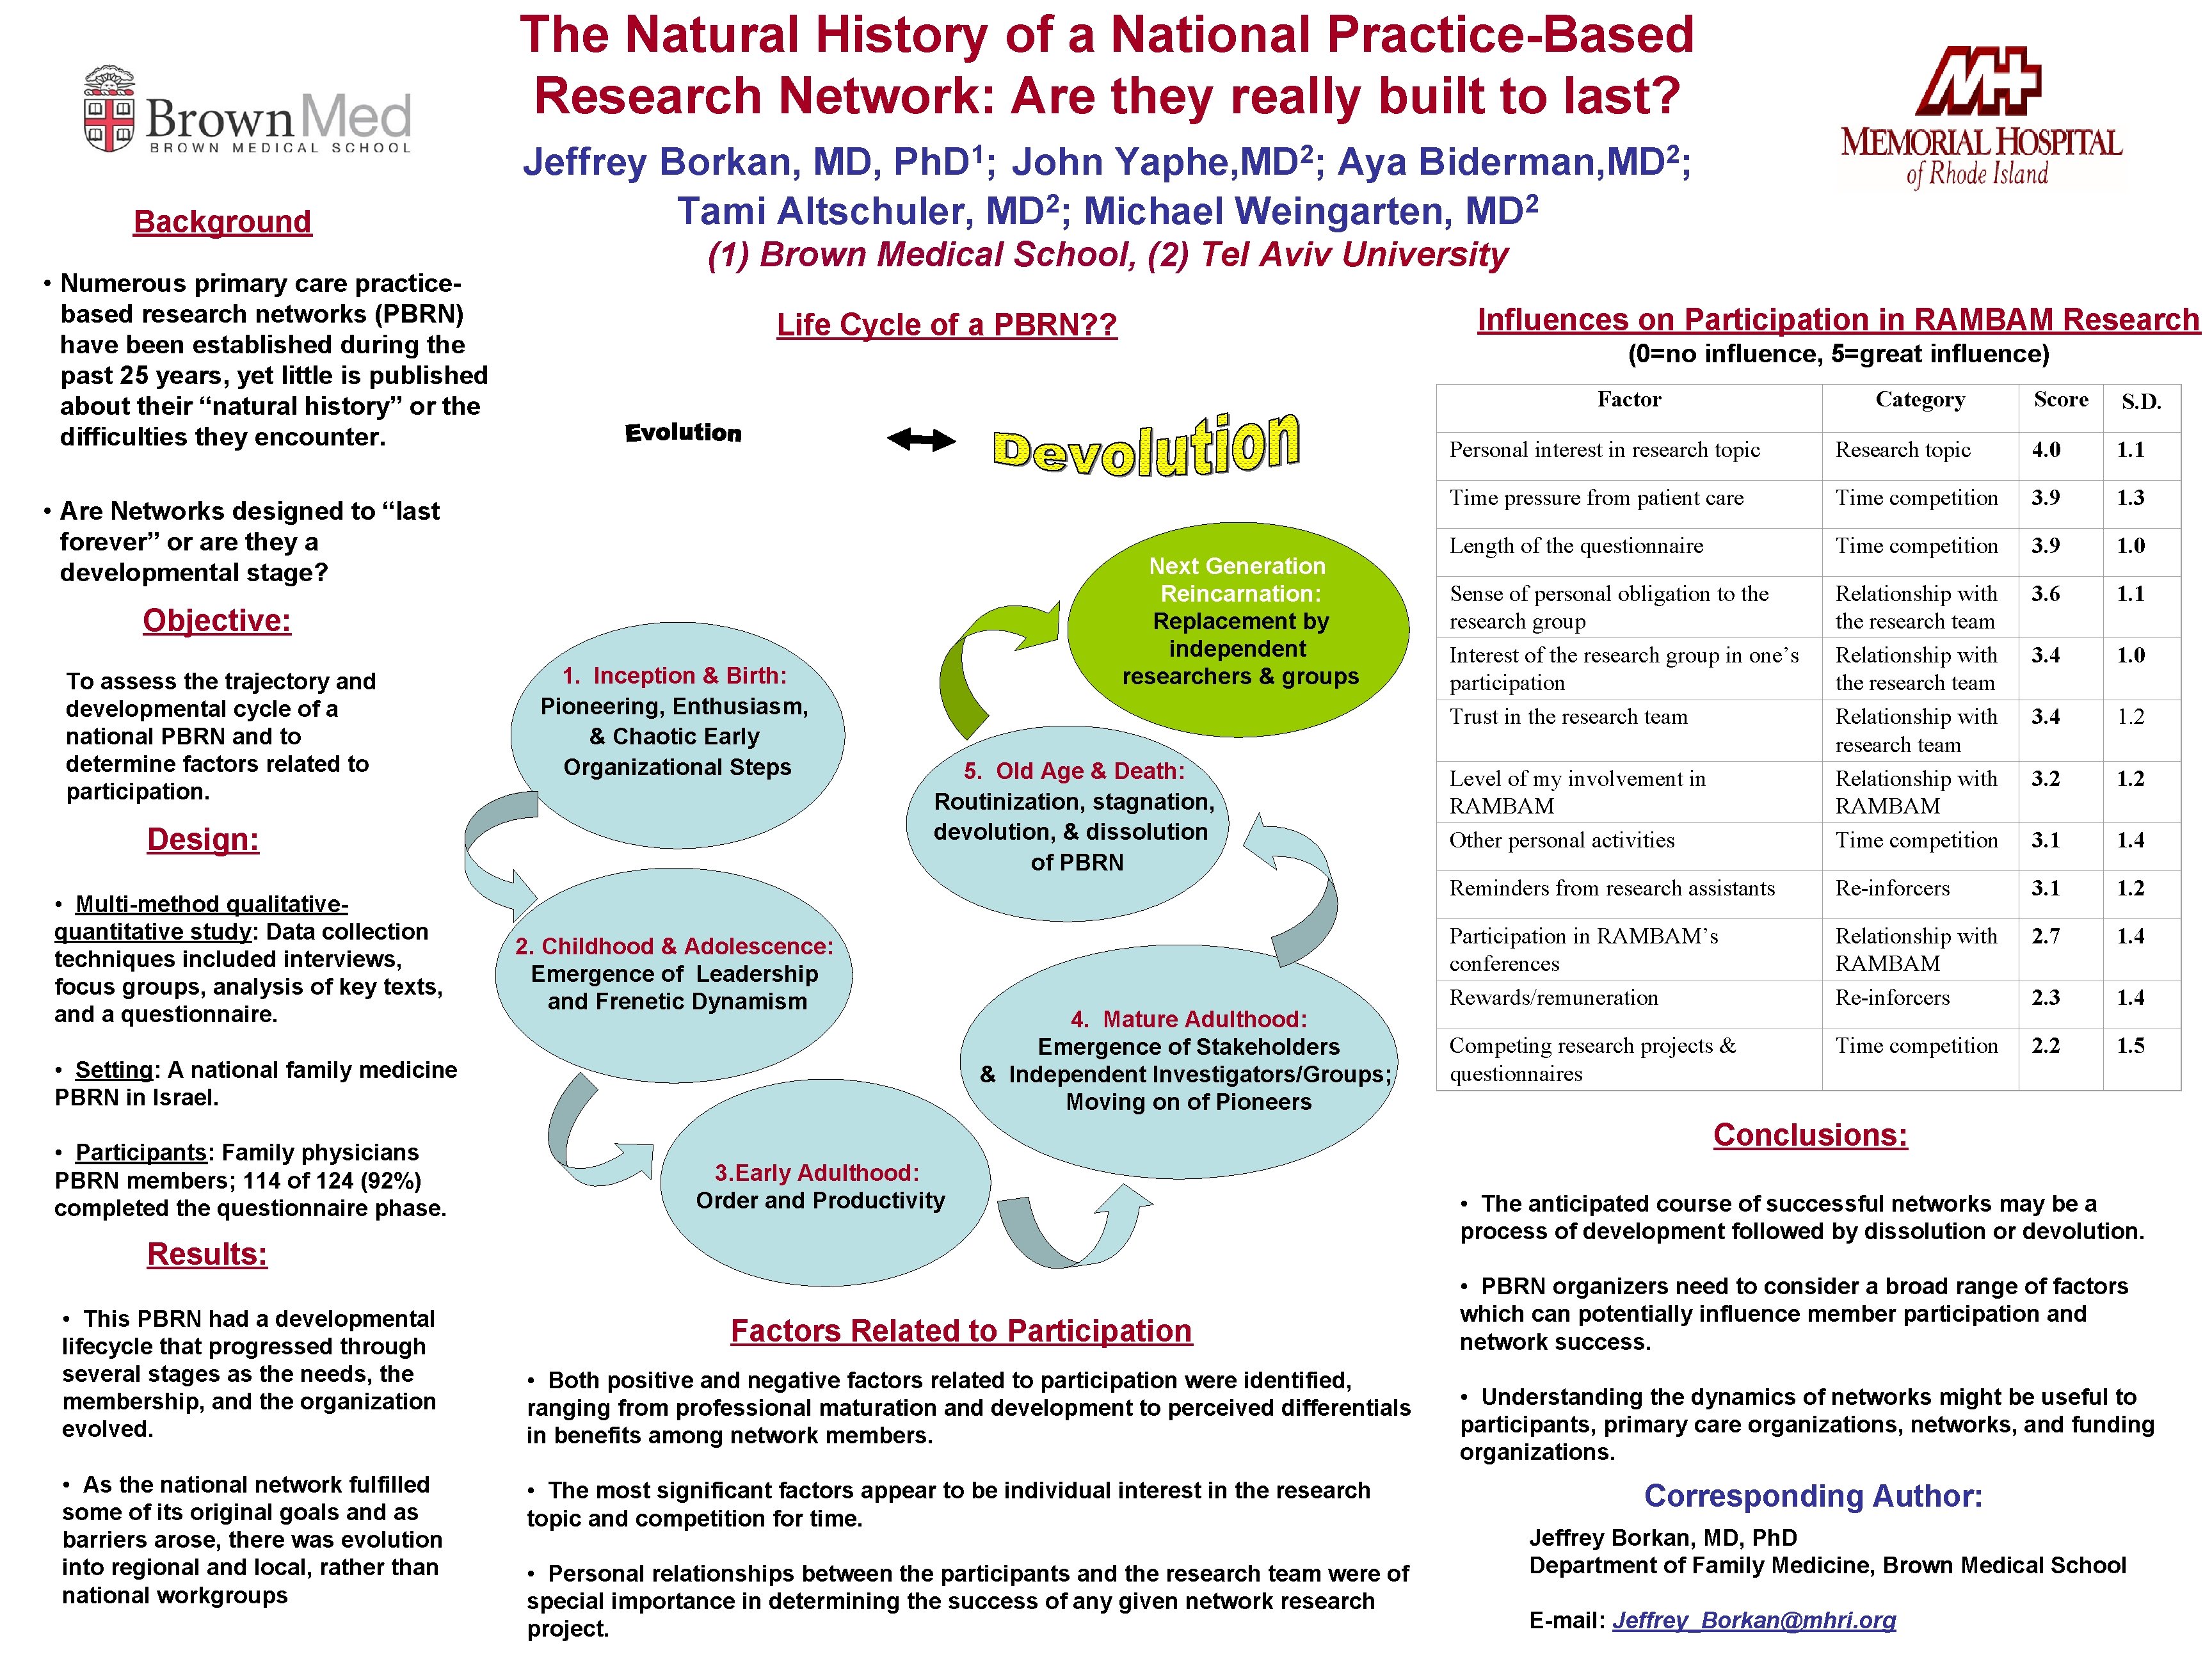 The Natural History of a National Practice-Based Research Network: Are they really built to